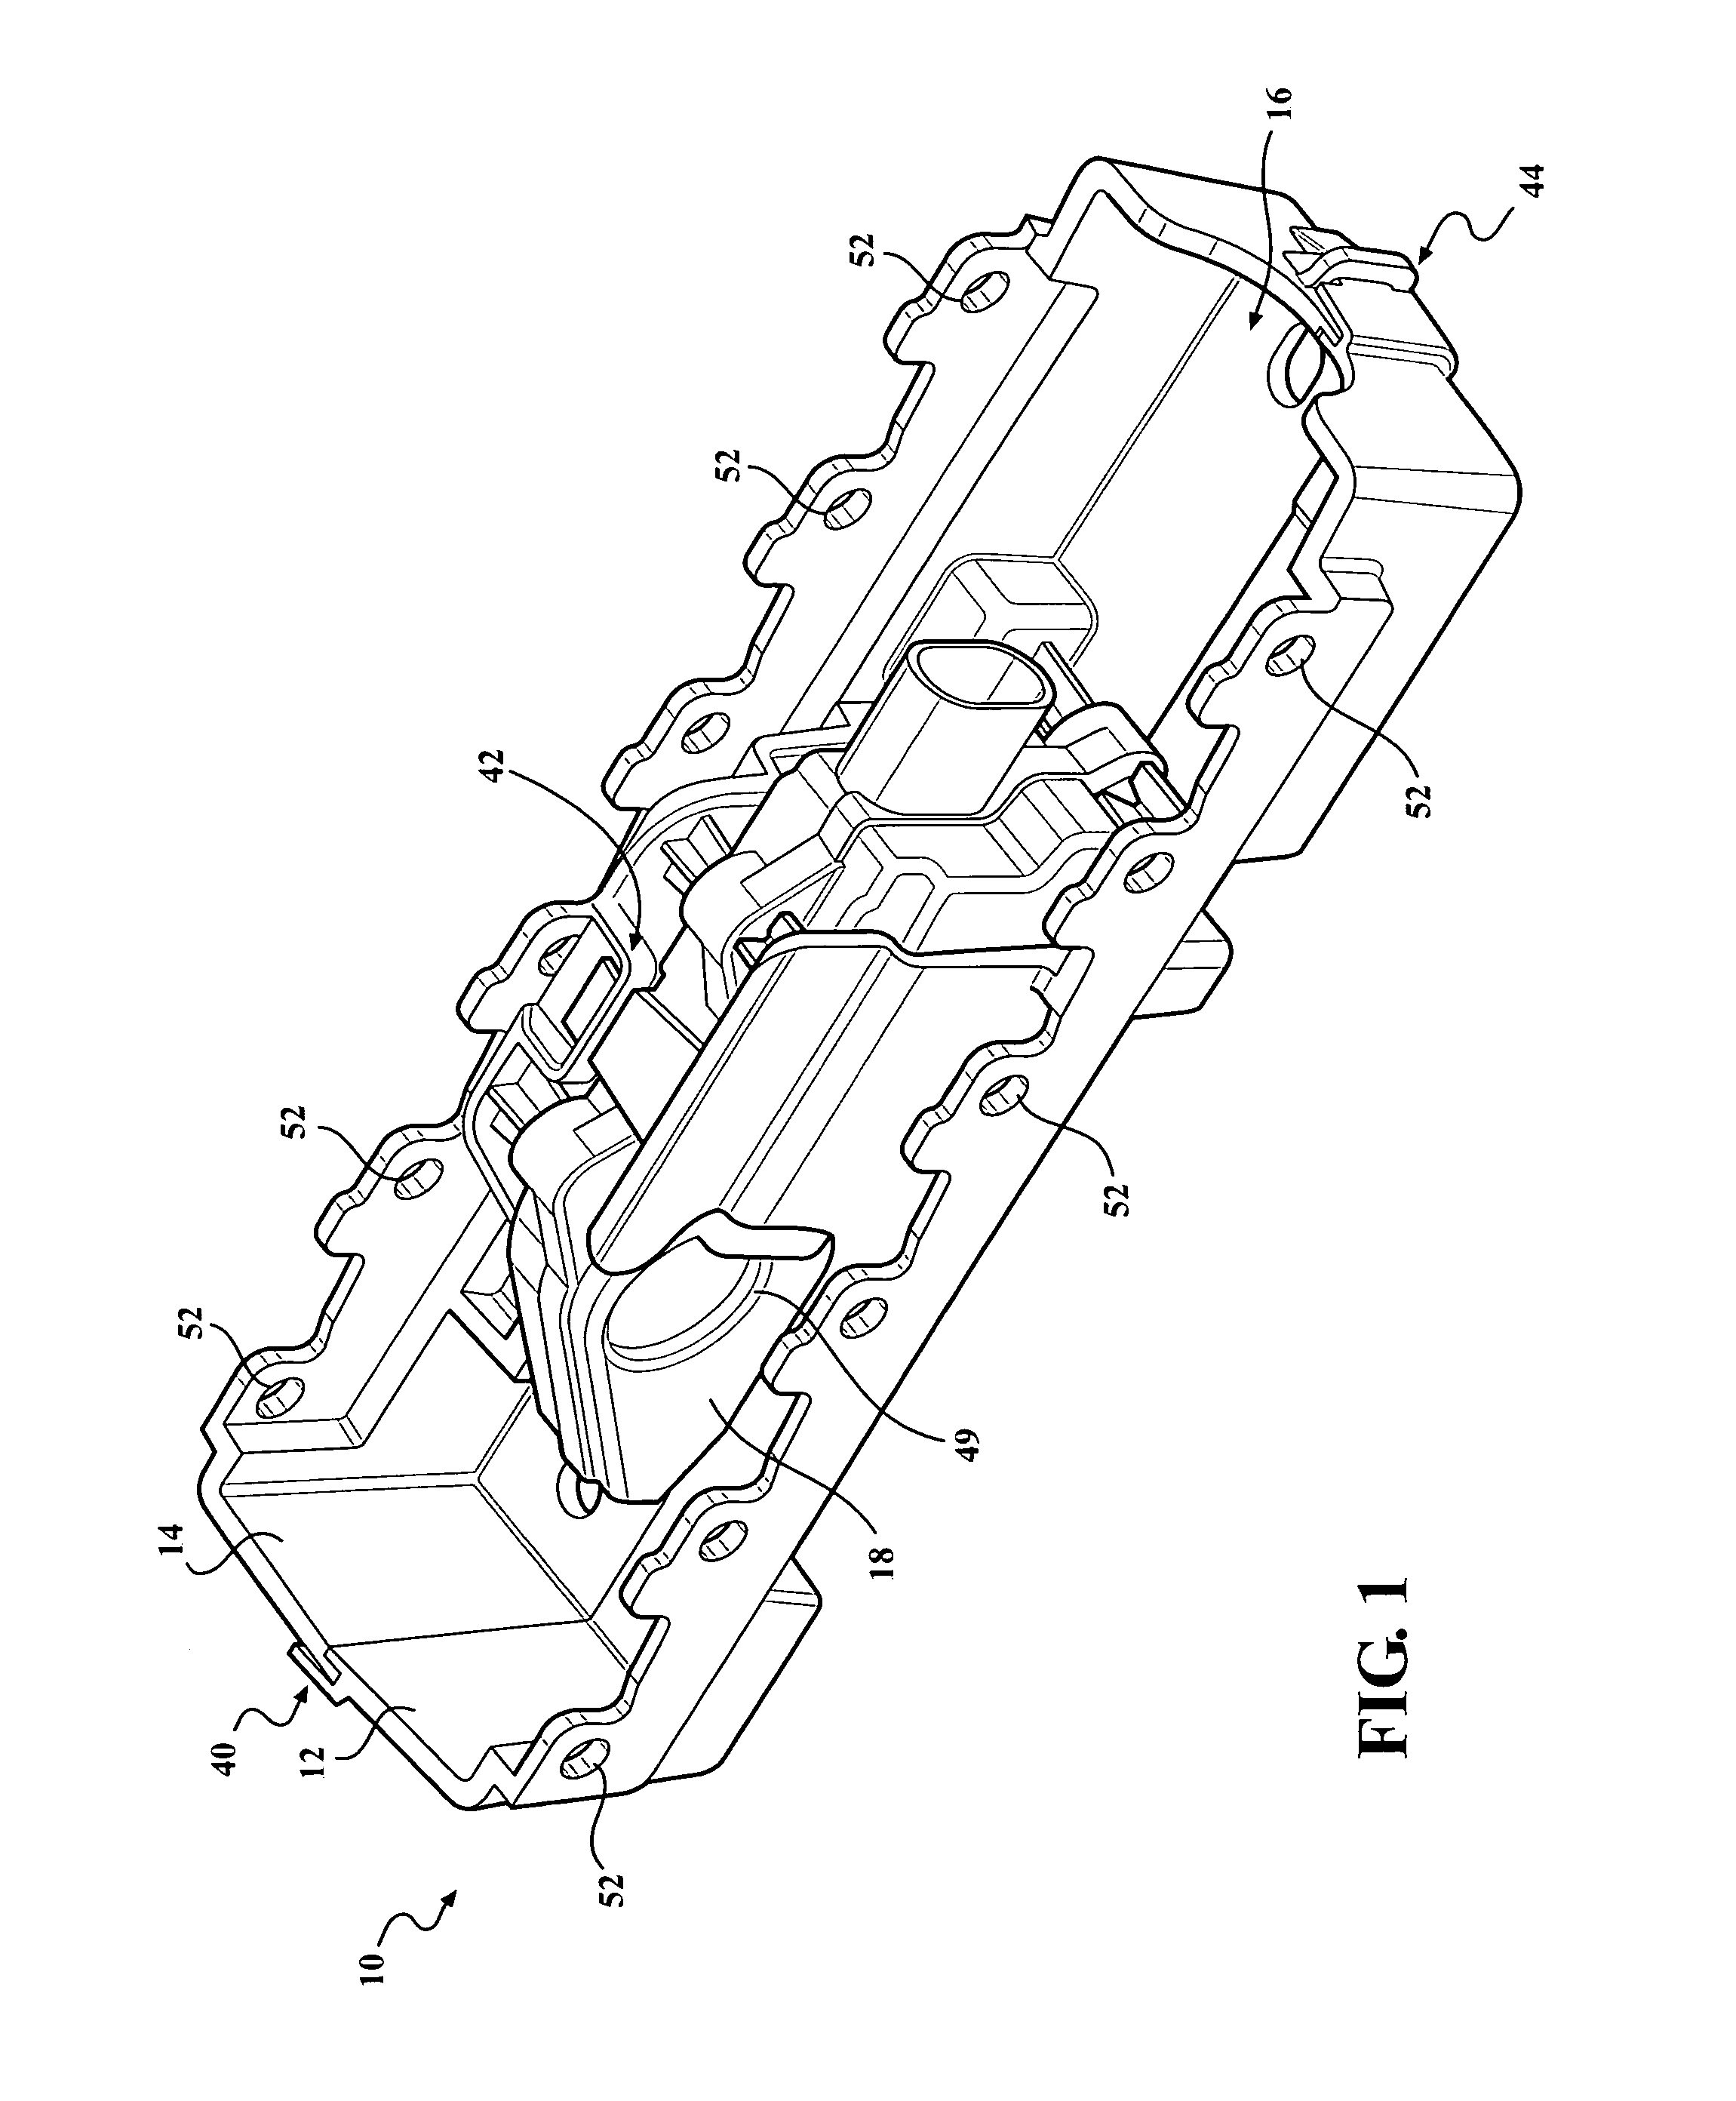 Bracket-active grille and actuator